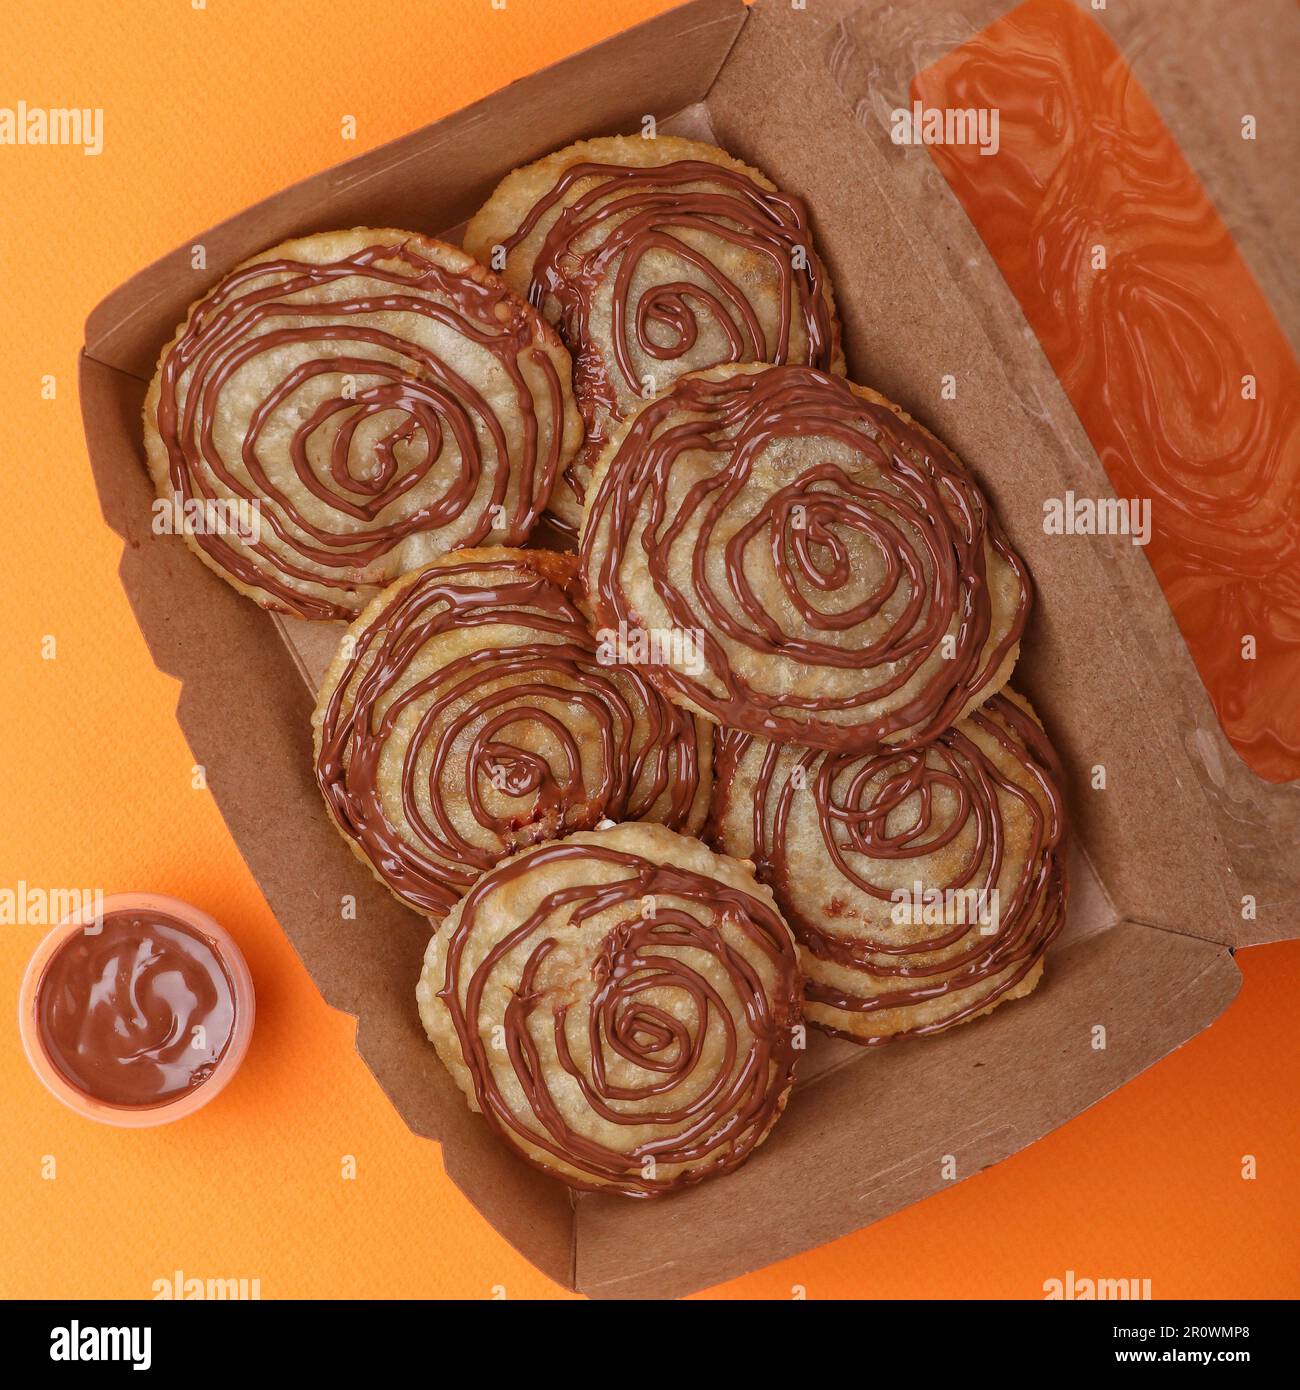 cookies with chocolate and caramel in a paper box on an orange background Stock Photo